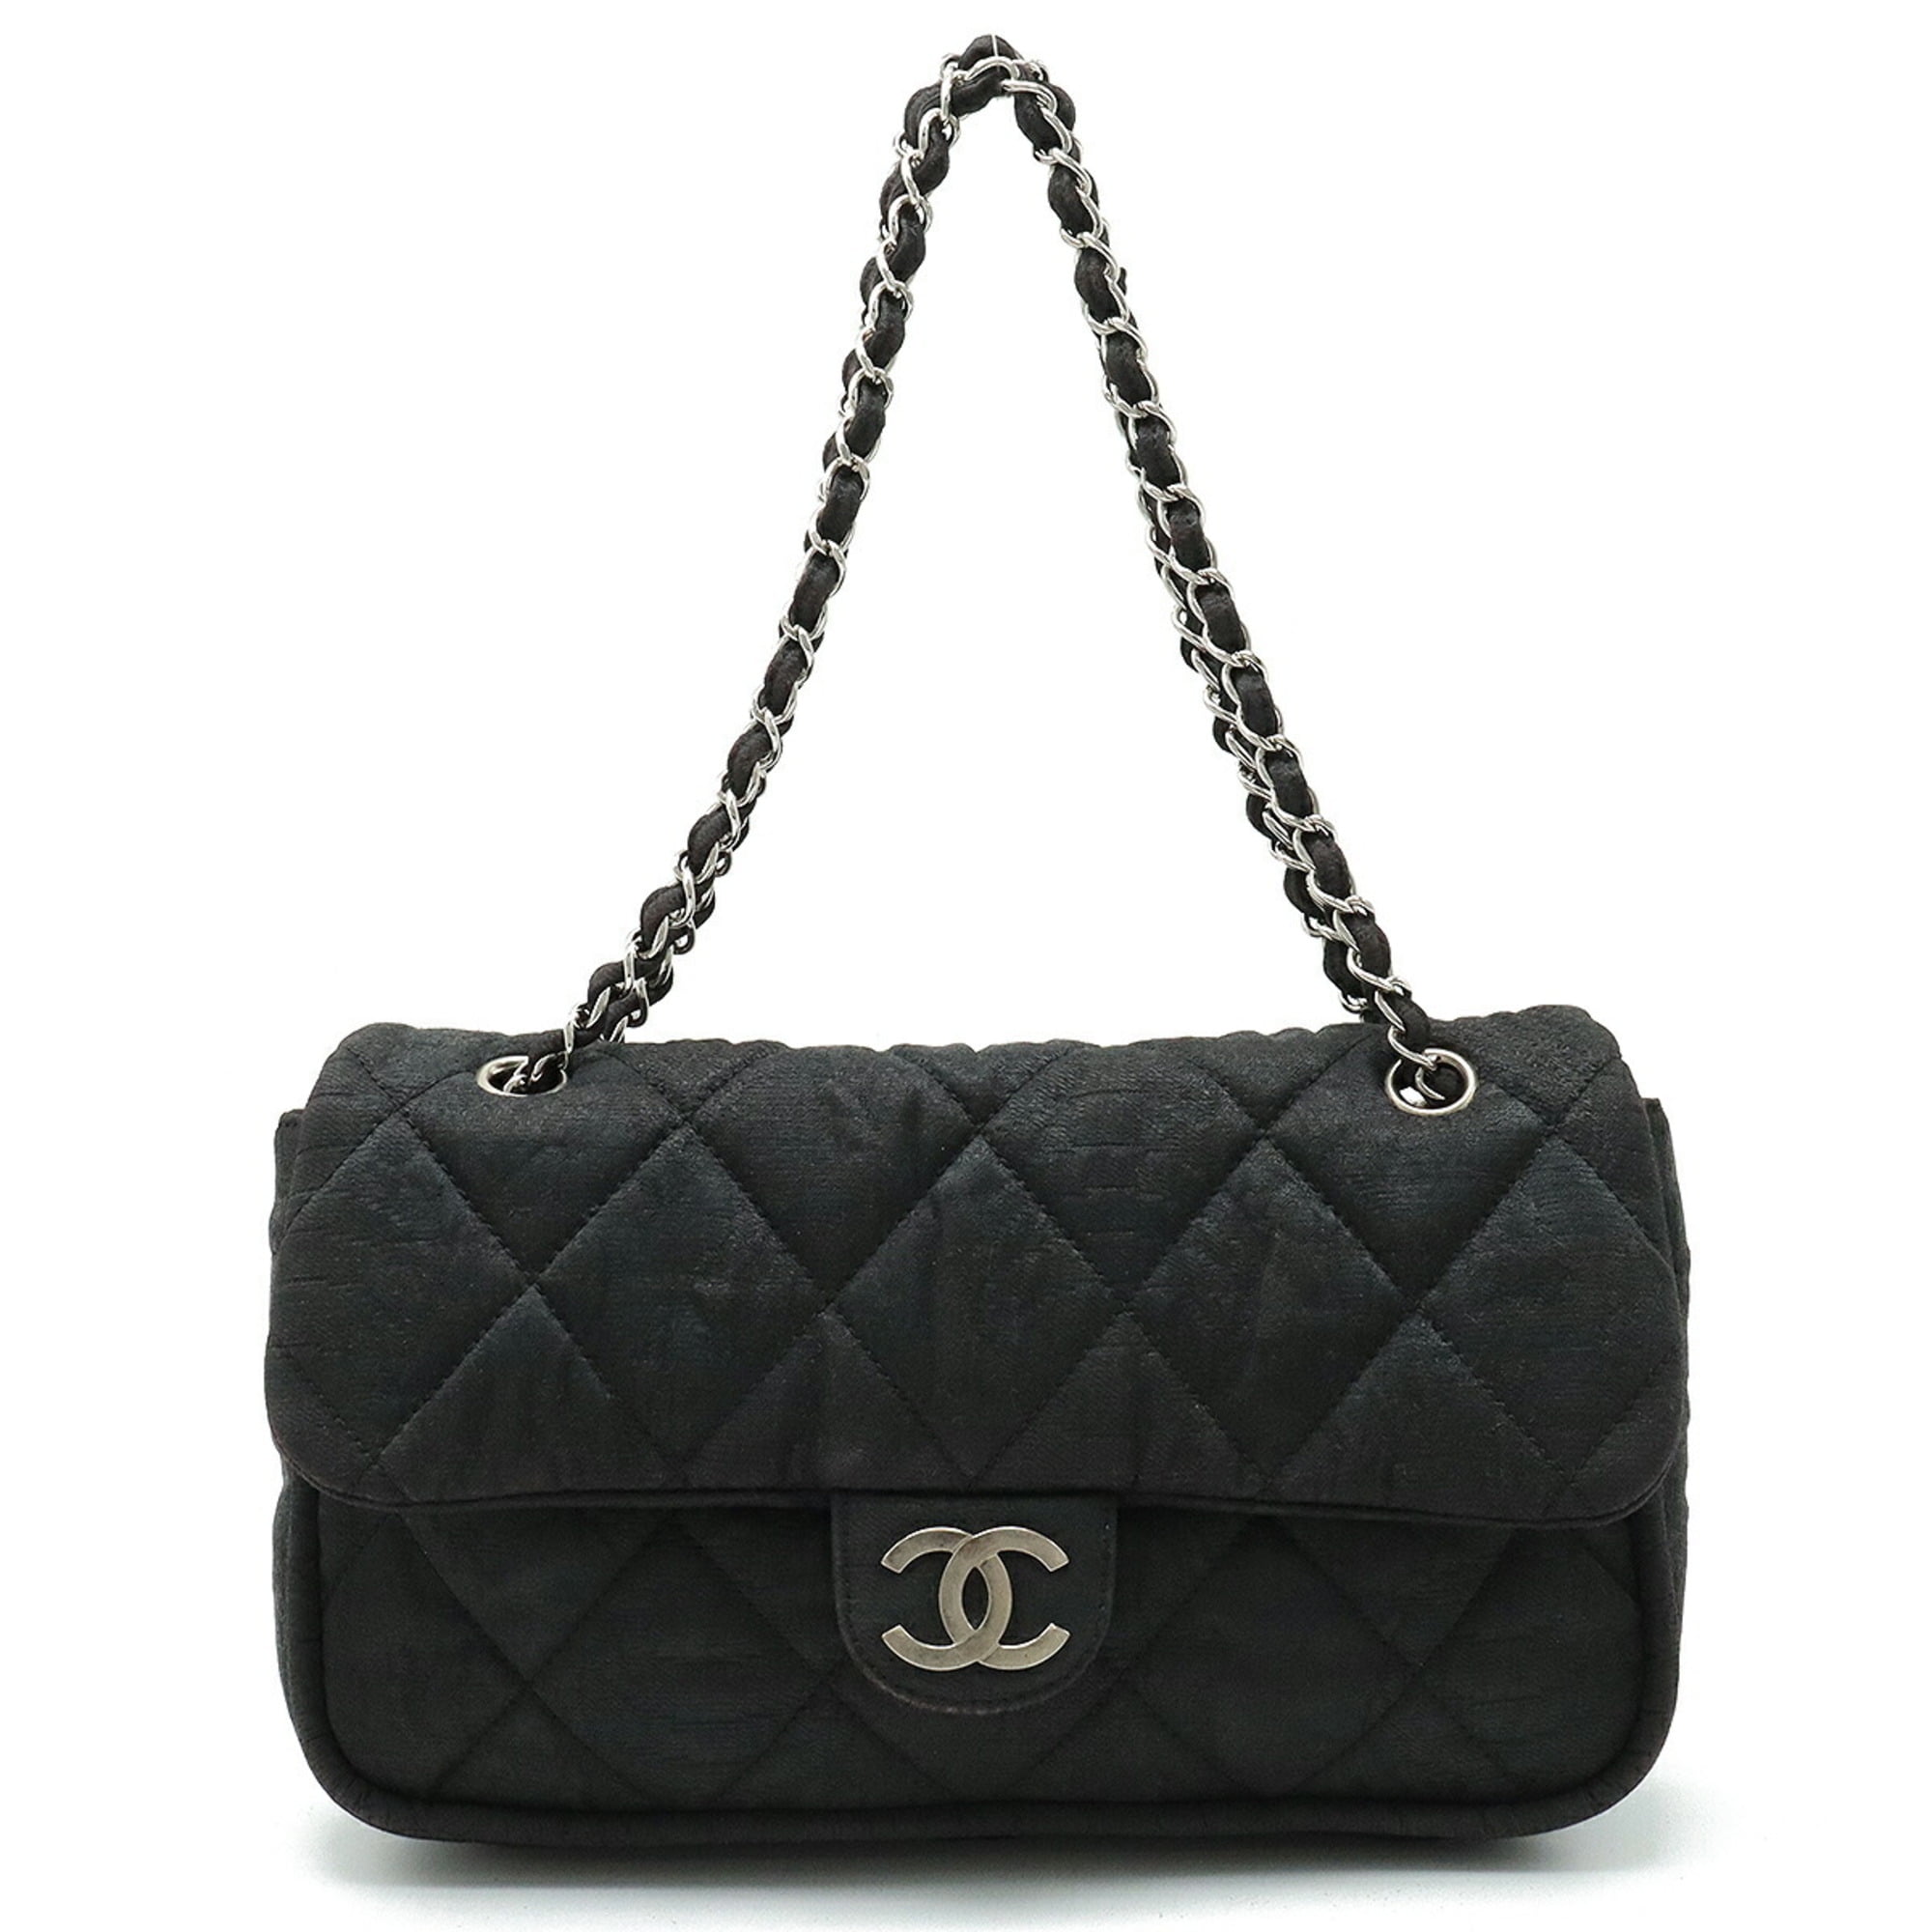 Chanel Mini Butterfly Bag Black Lambskin Leather - Silver Hardware |  Baghunter